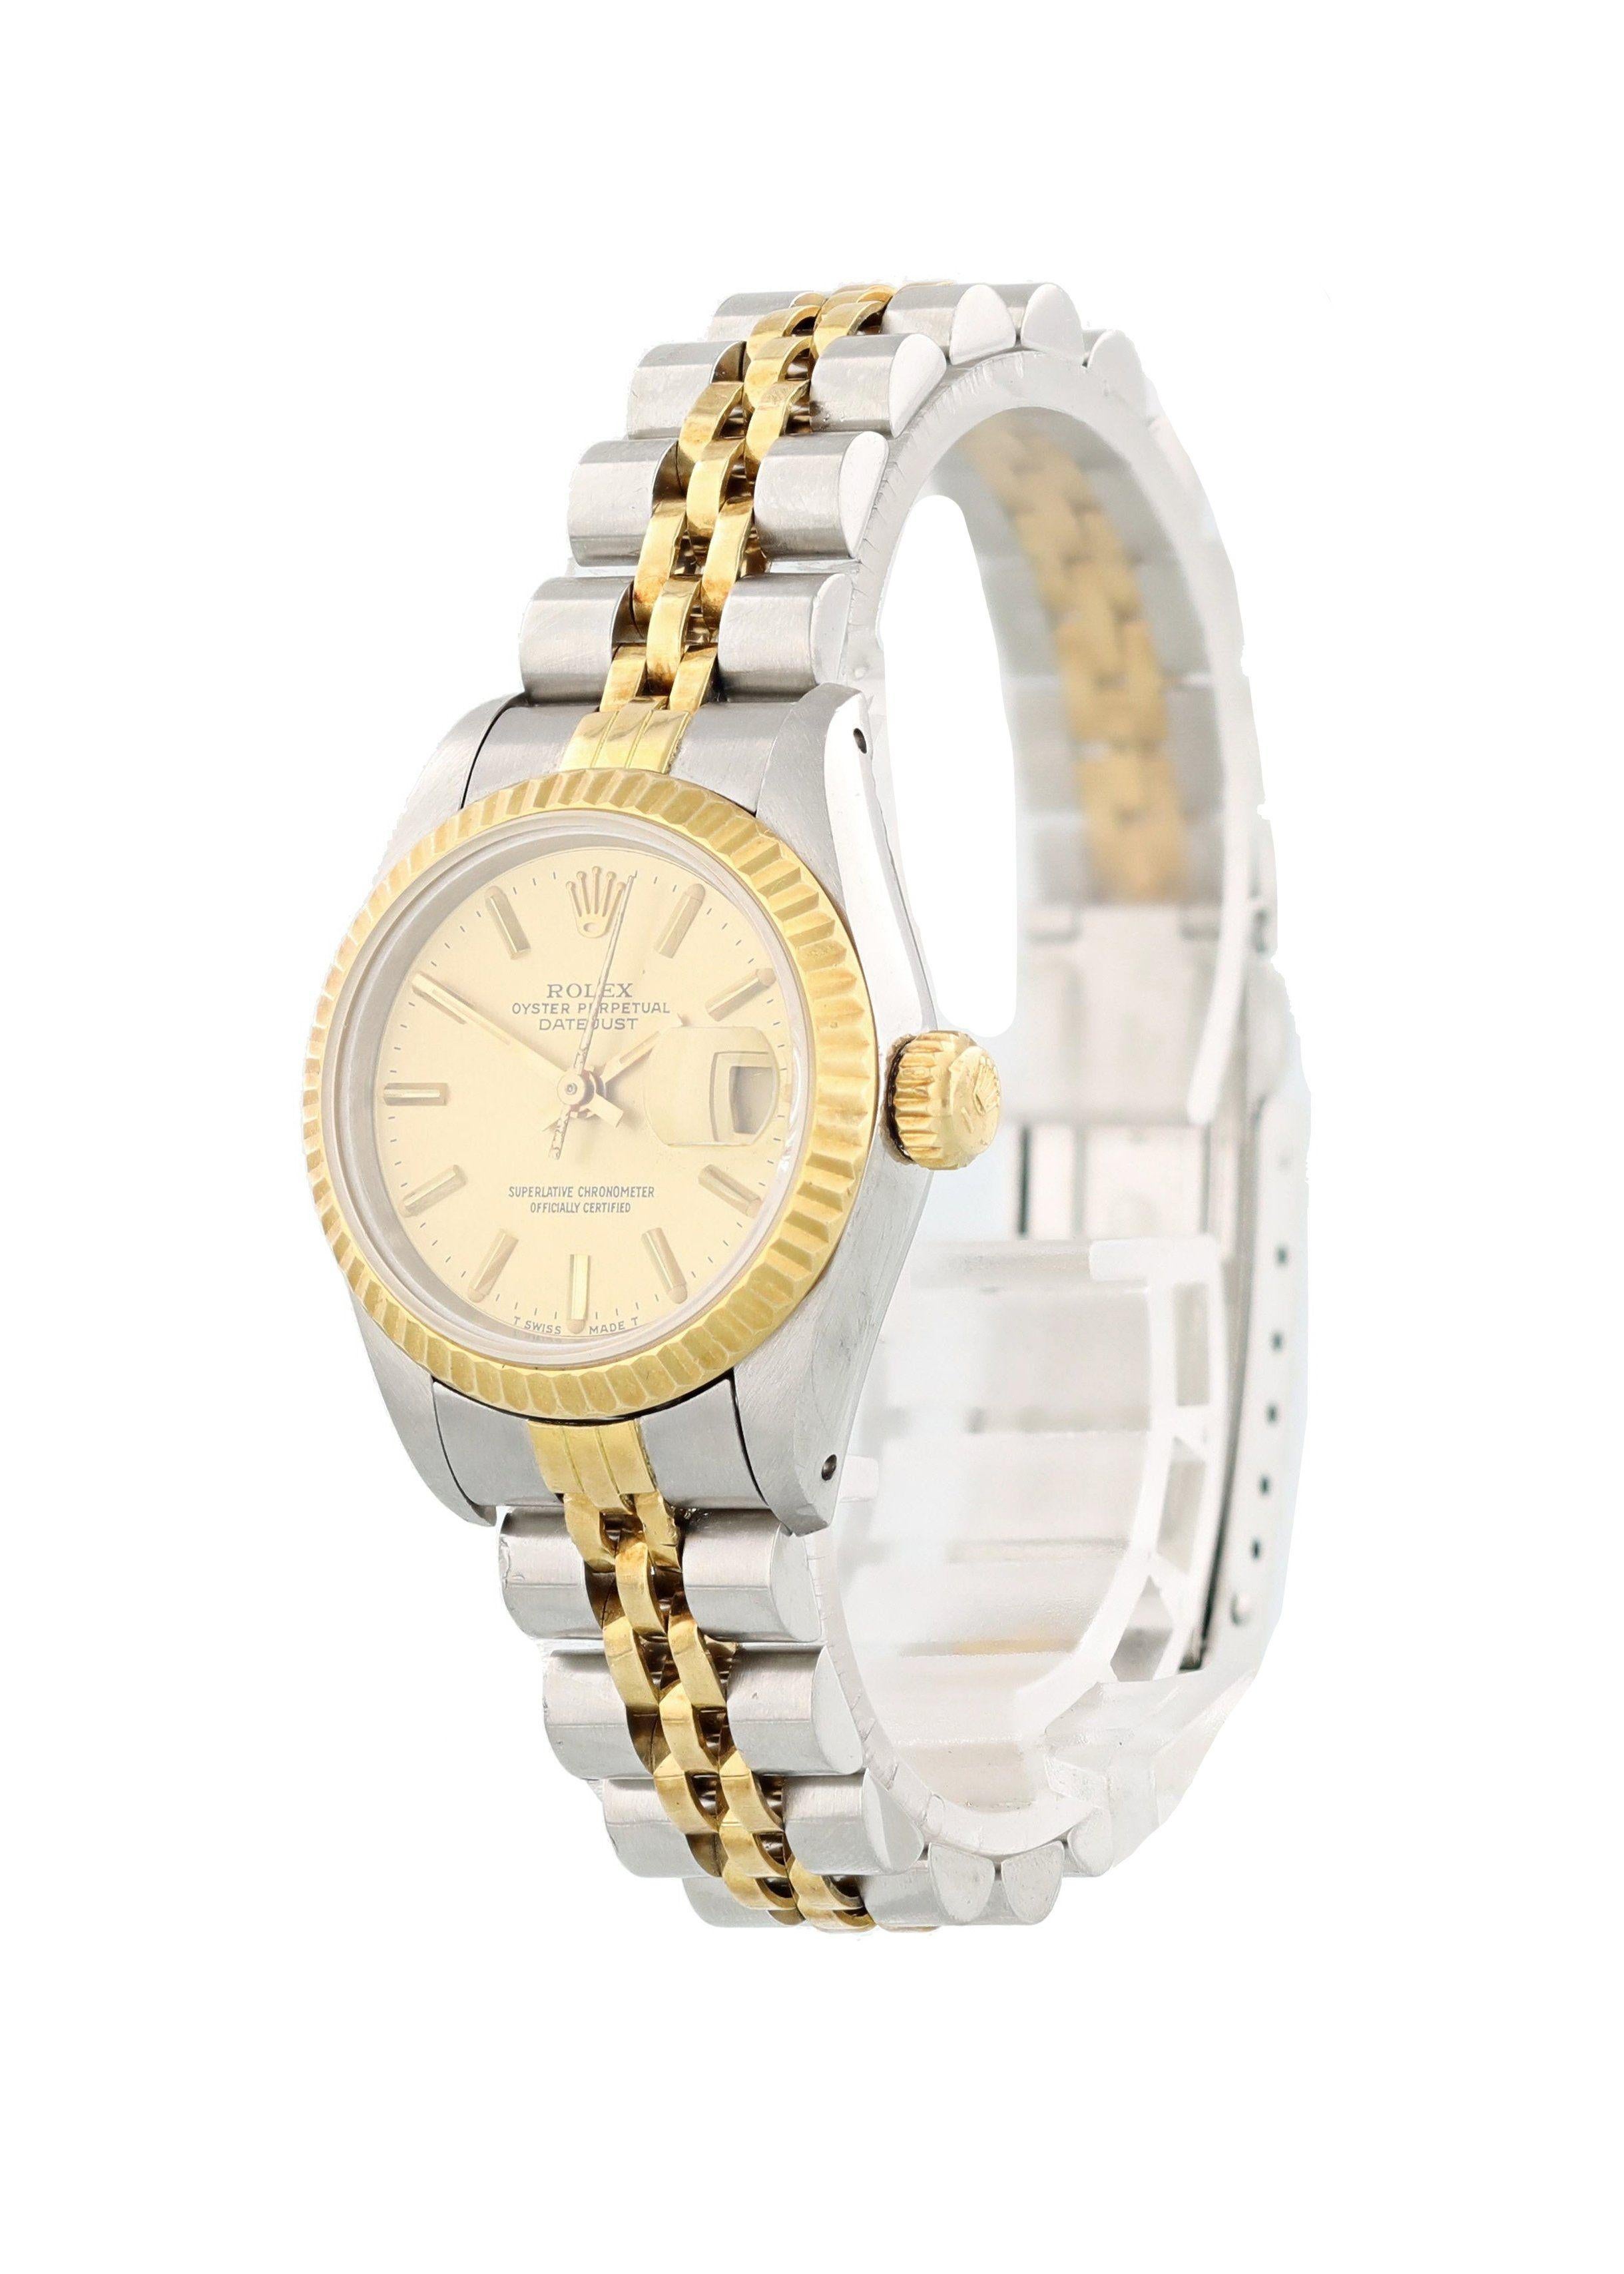 Rolex Datejust Professional 69173 Ladies Watch. 
26mm Stainless Steel case. 
Yellow Gold Stationary bezel. 
Champagne dial with Luminous gold hands and index hour markers. 
Minute markers on the outer dial. 
Date display at the 3 o'clock position.